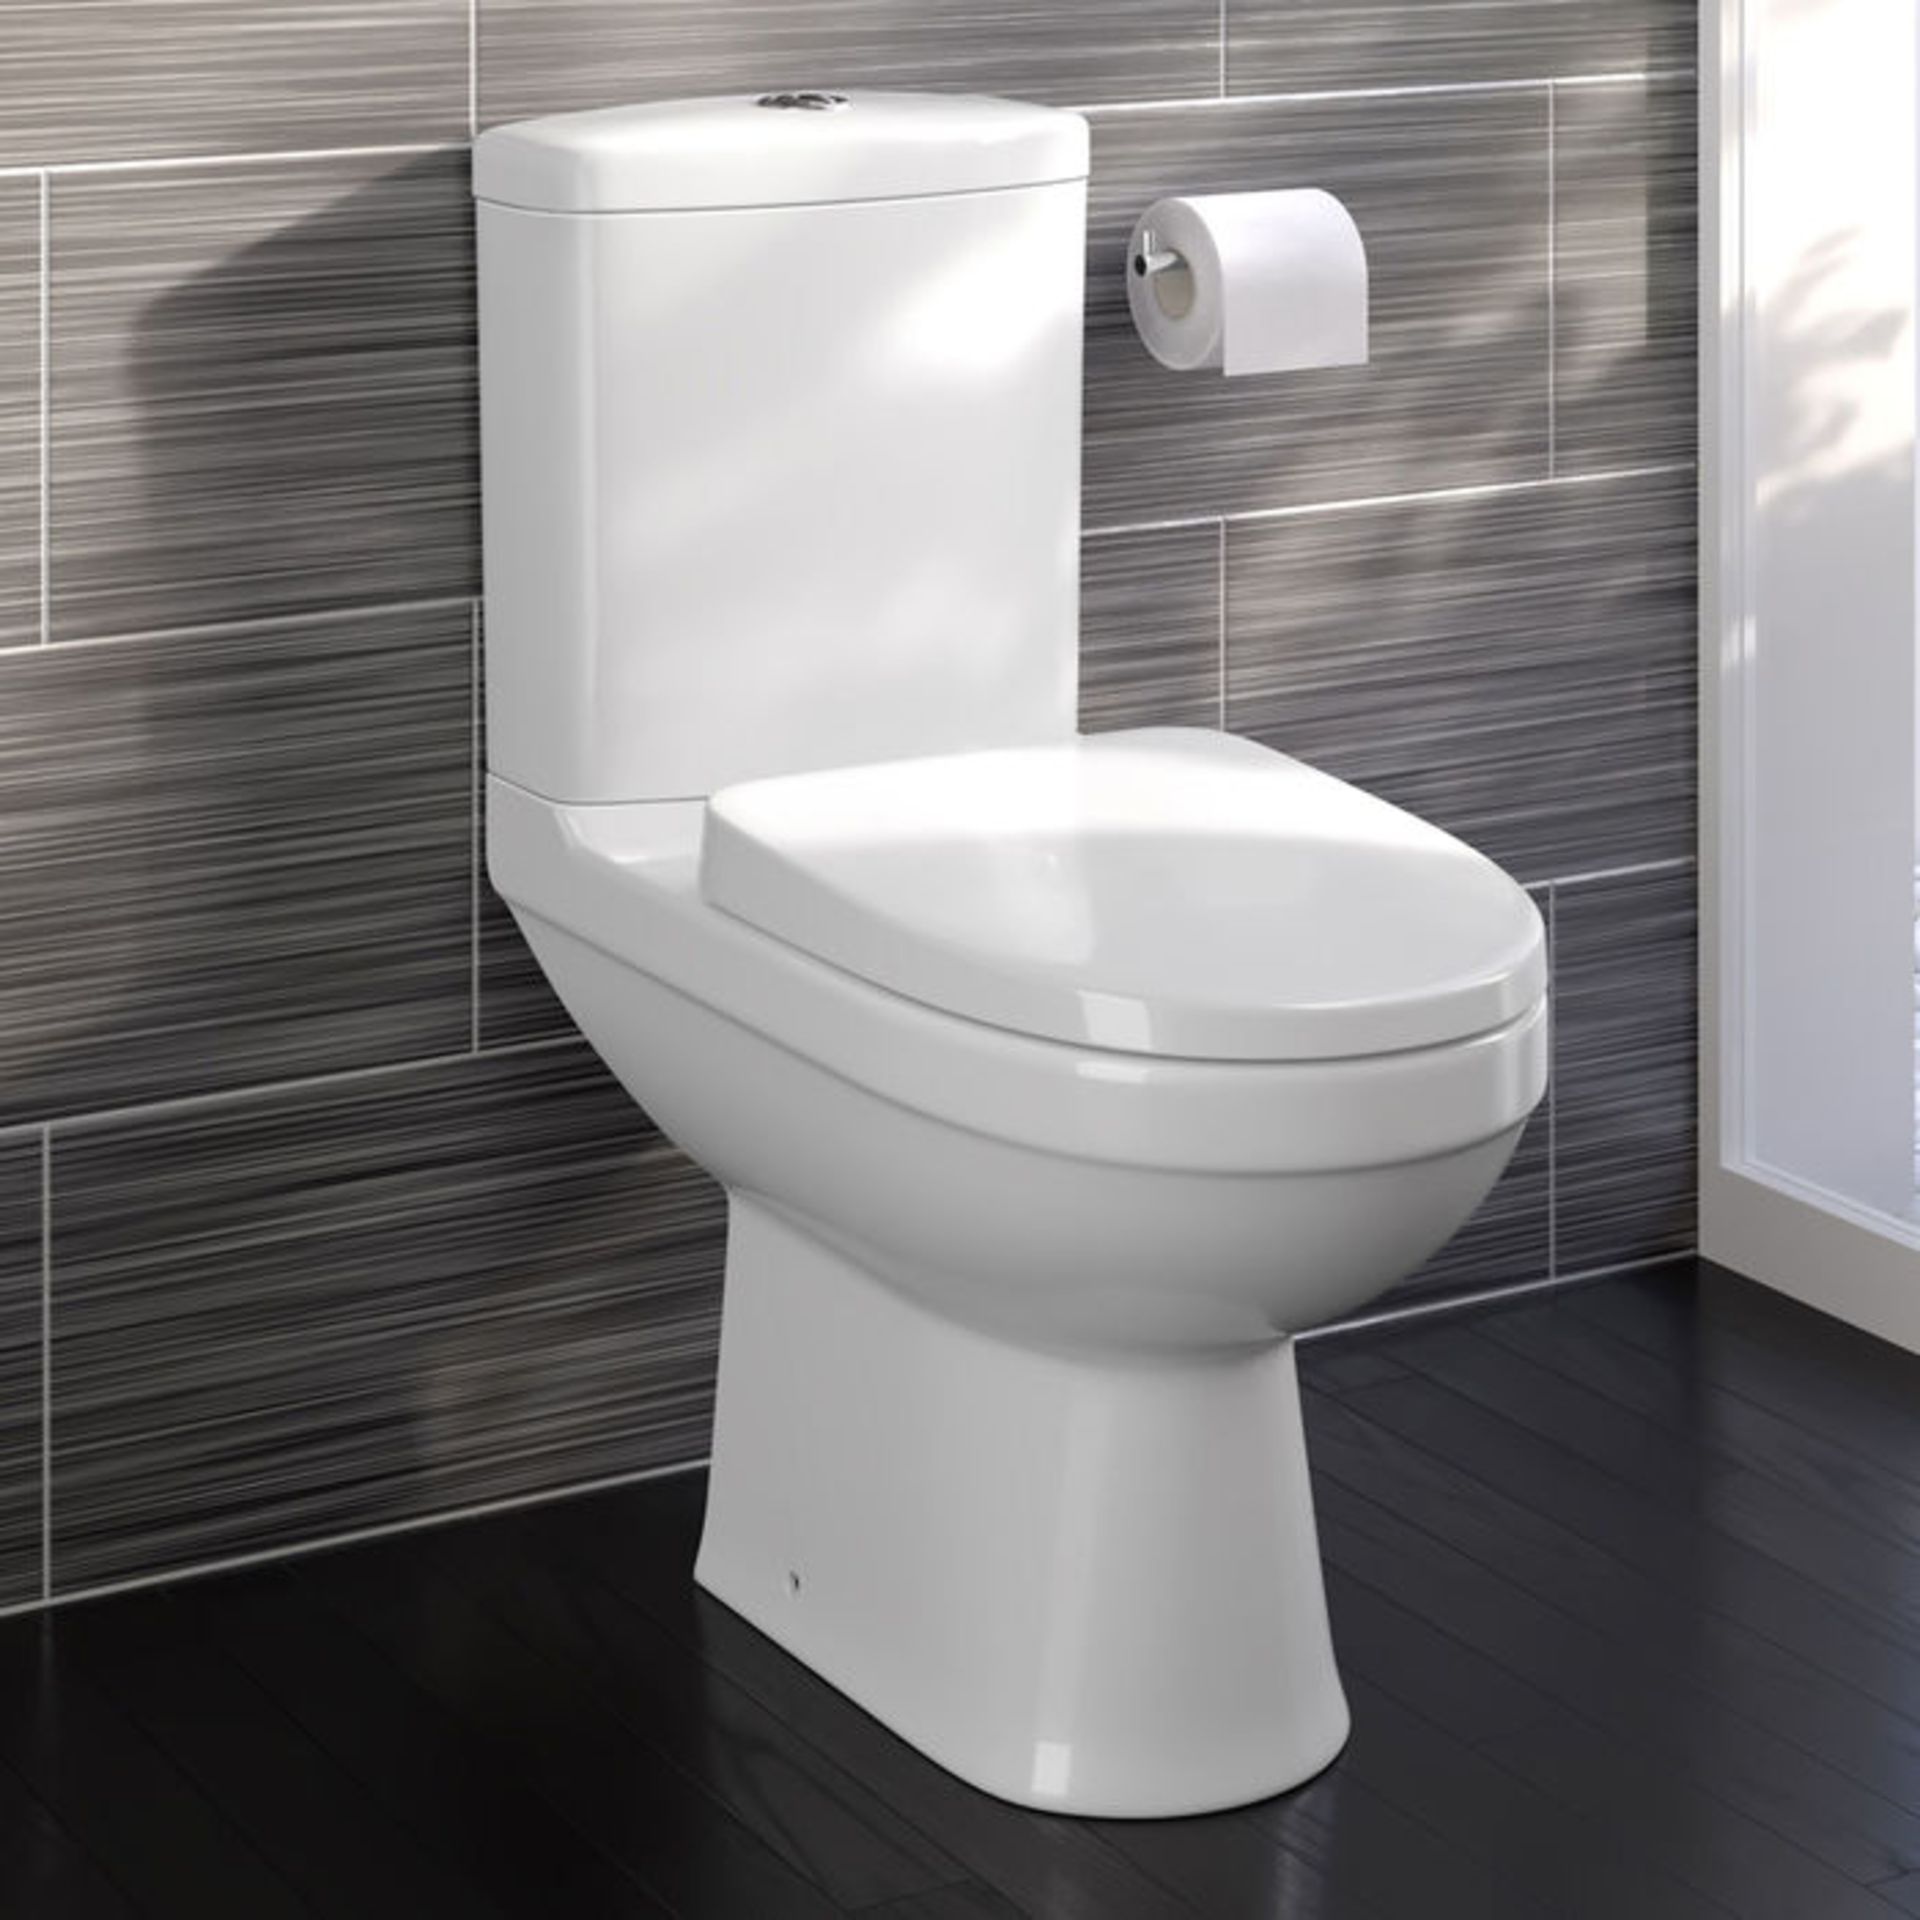 (ZZ68) Sabrosa II Close Coupled Toilet & Cistern inc Soft Close Seat. Made from White Vitreous China